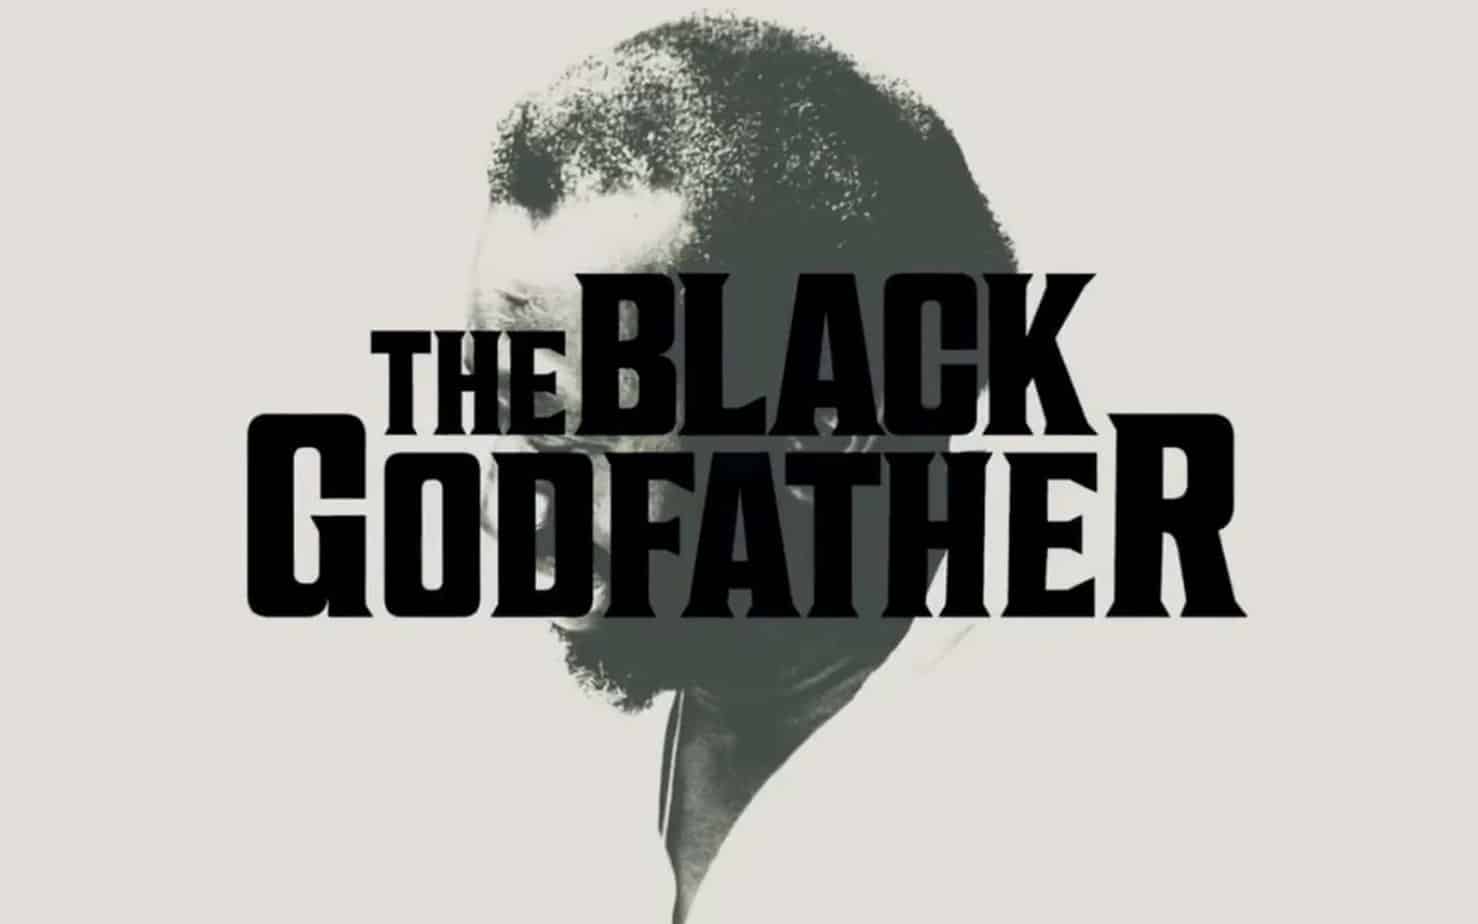 "The Black Godfather" is the Perfect Way to Honor the Passing of Bill Withers